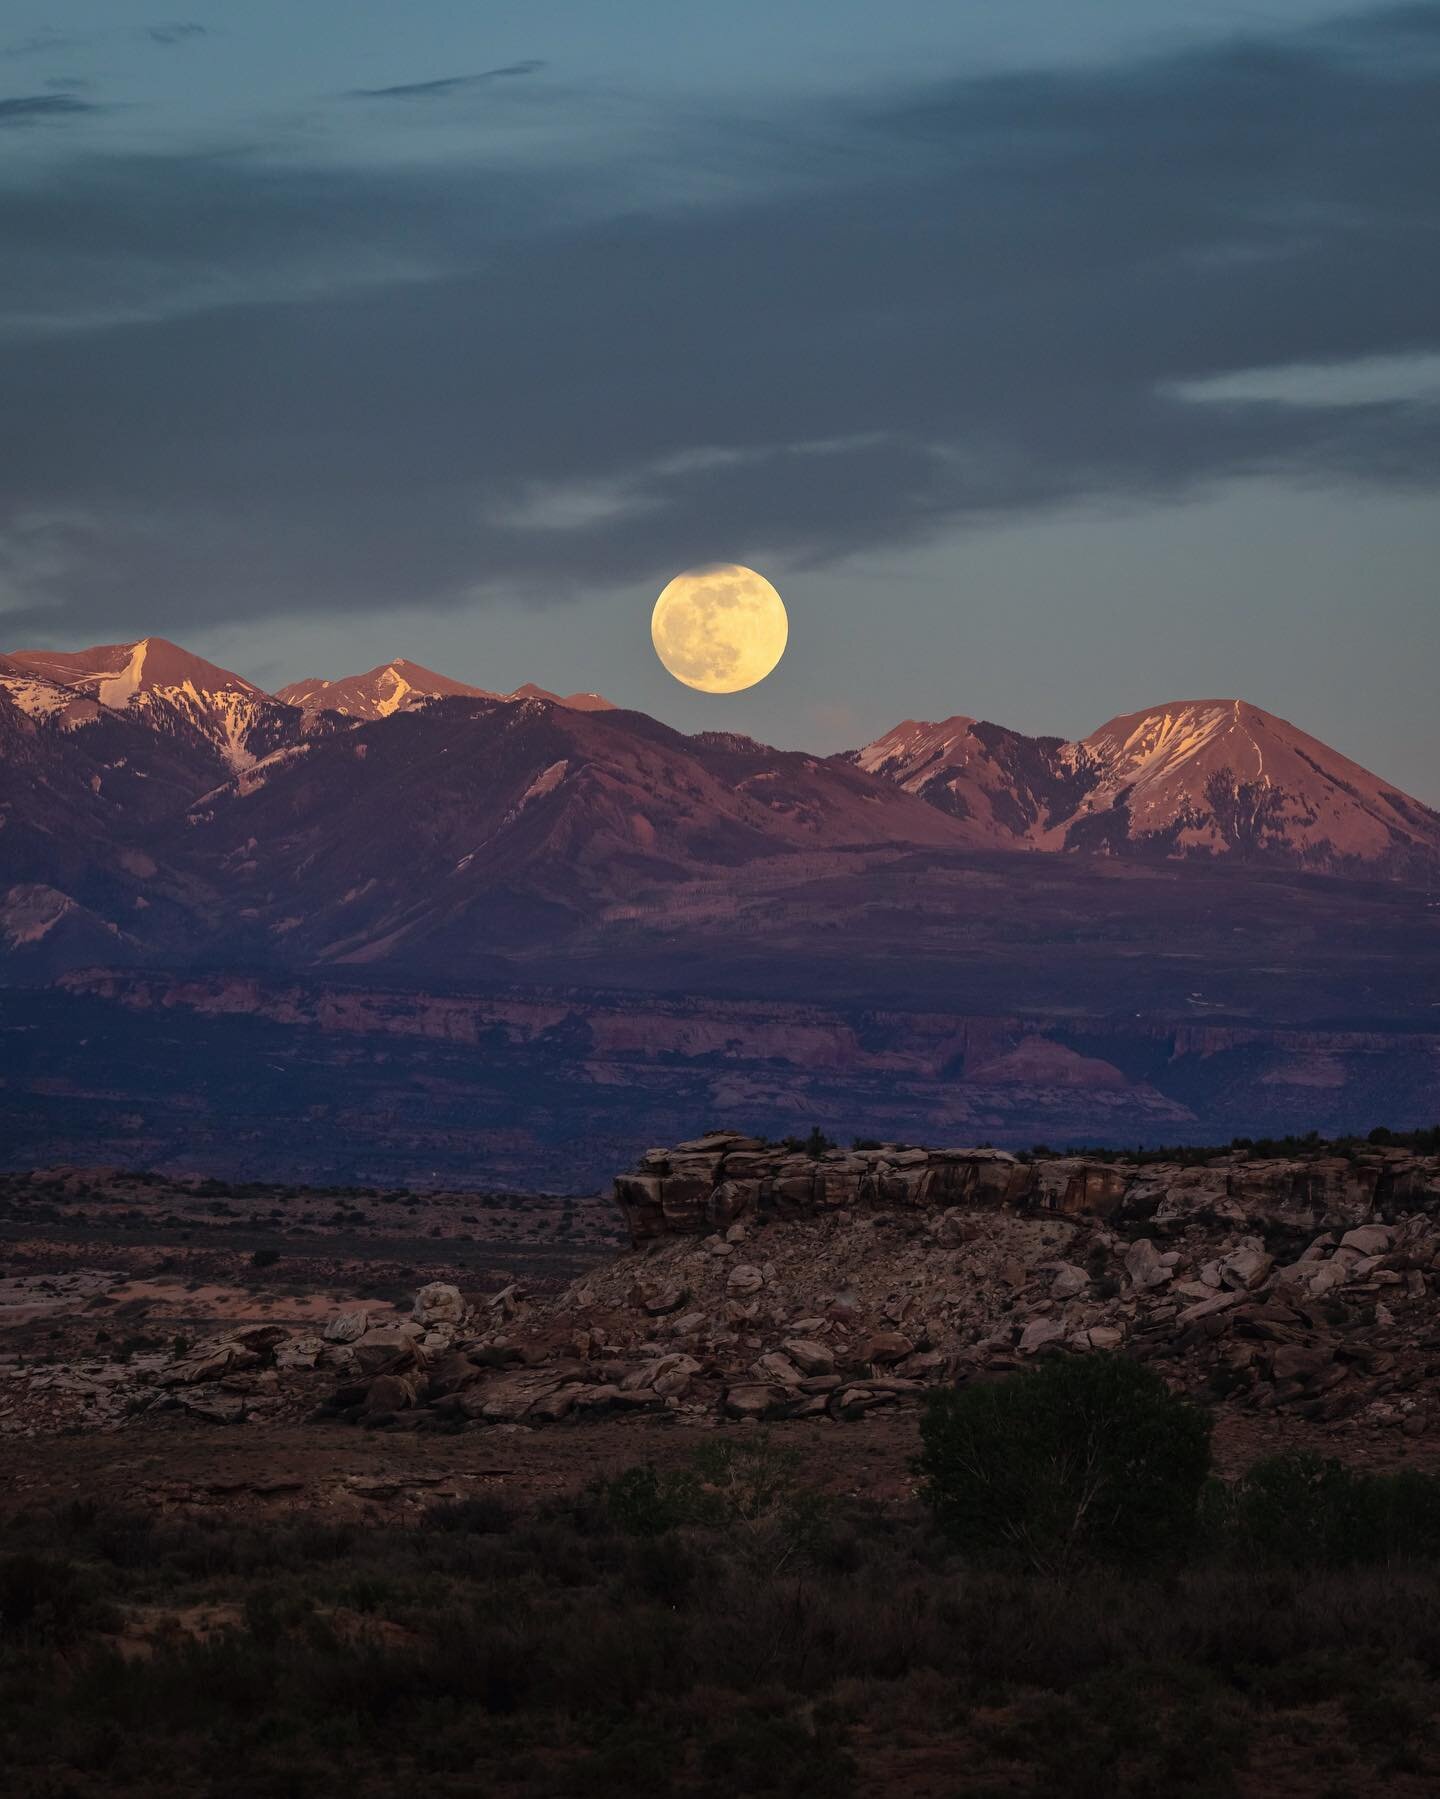 Moonrise over the La Sals. Didn&rsquo;t think I&rsquo;d be back here so soon, but here I am, drinking coffee and breathing the fresh post rain desert air.